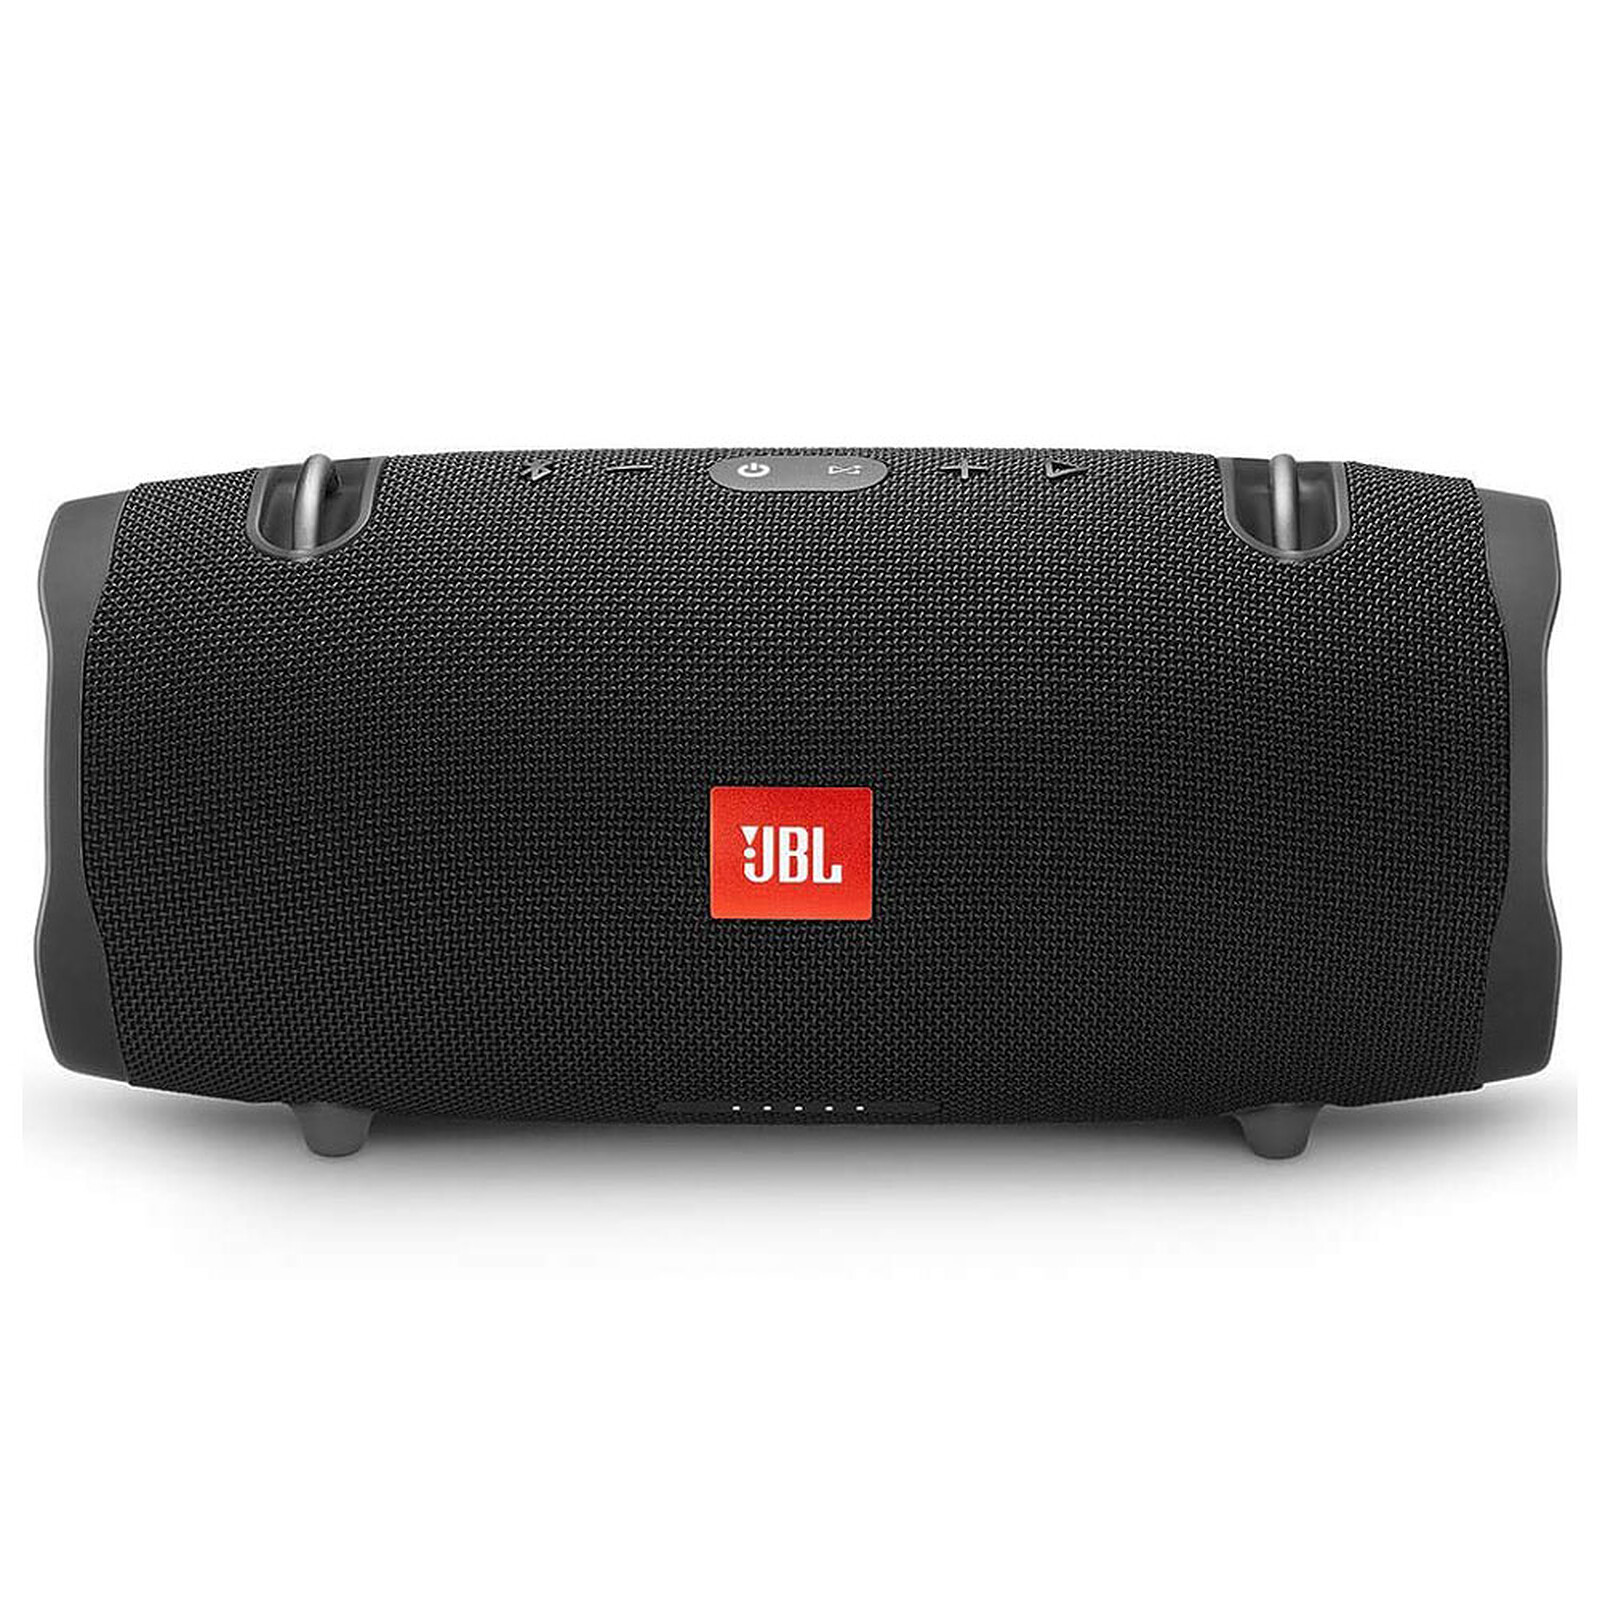 Jbl Xtreme Firmware Update Xtreme 2 Standing Review Position 